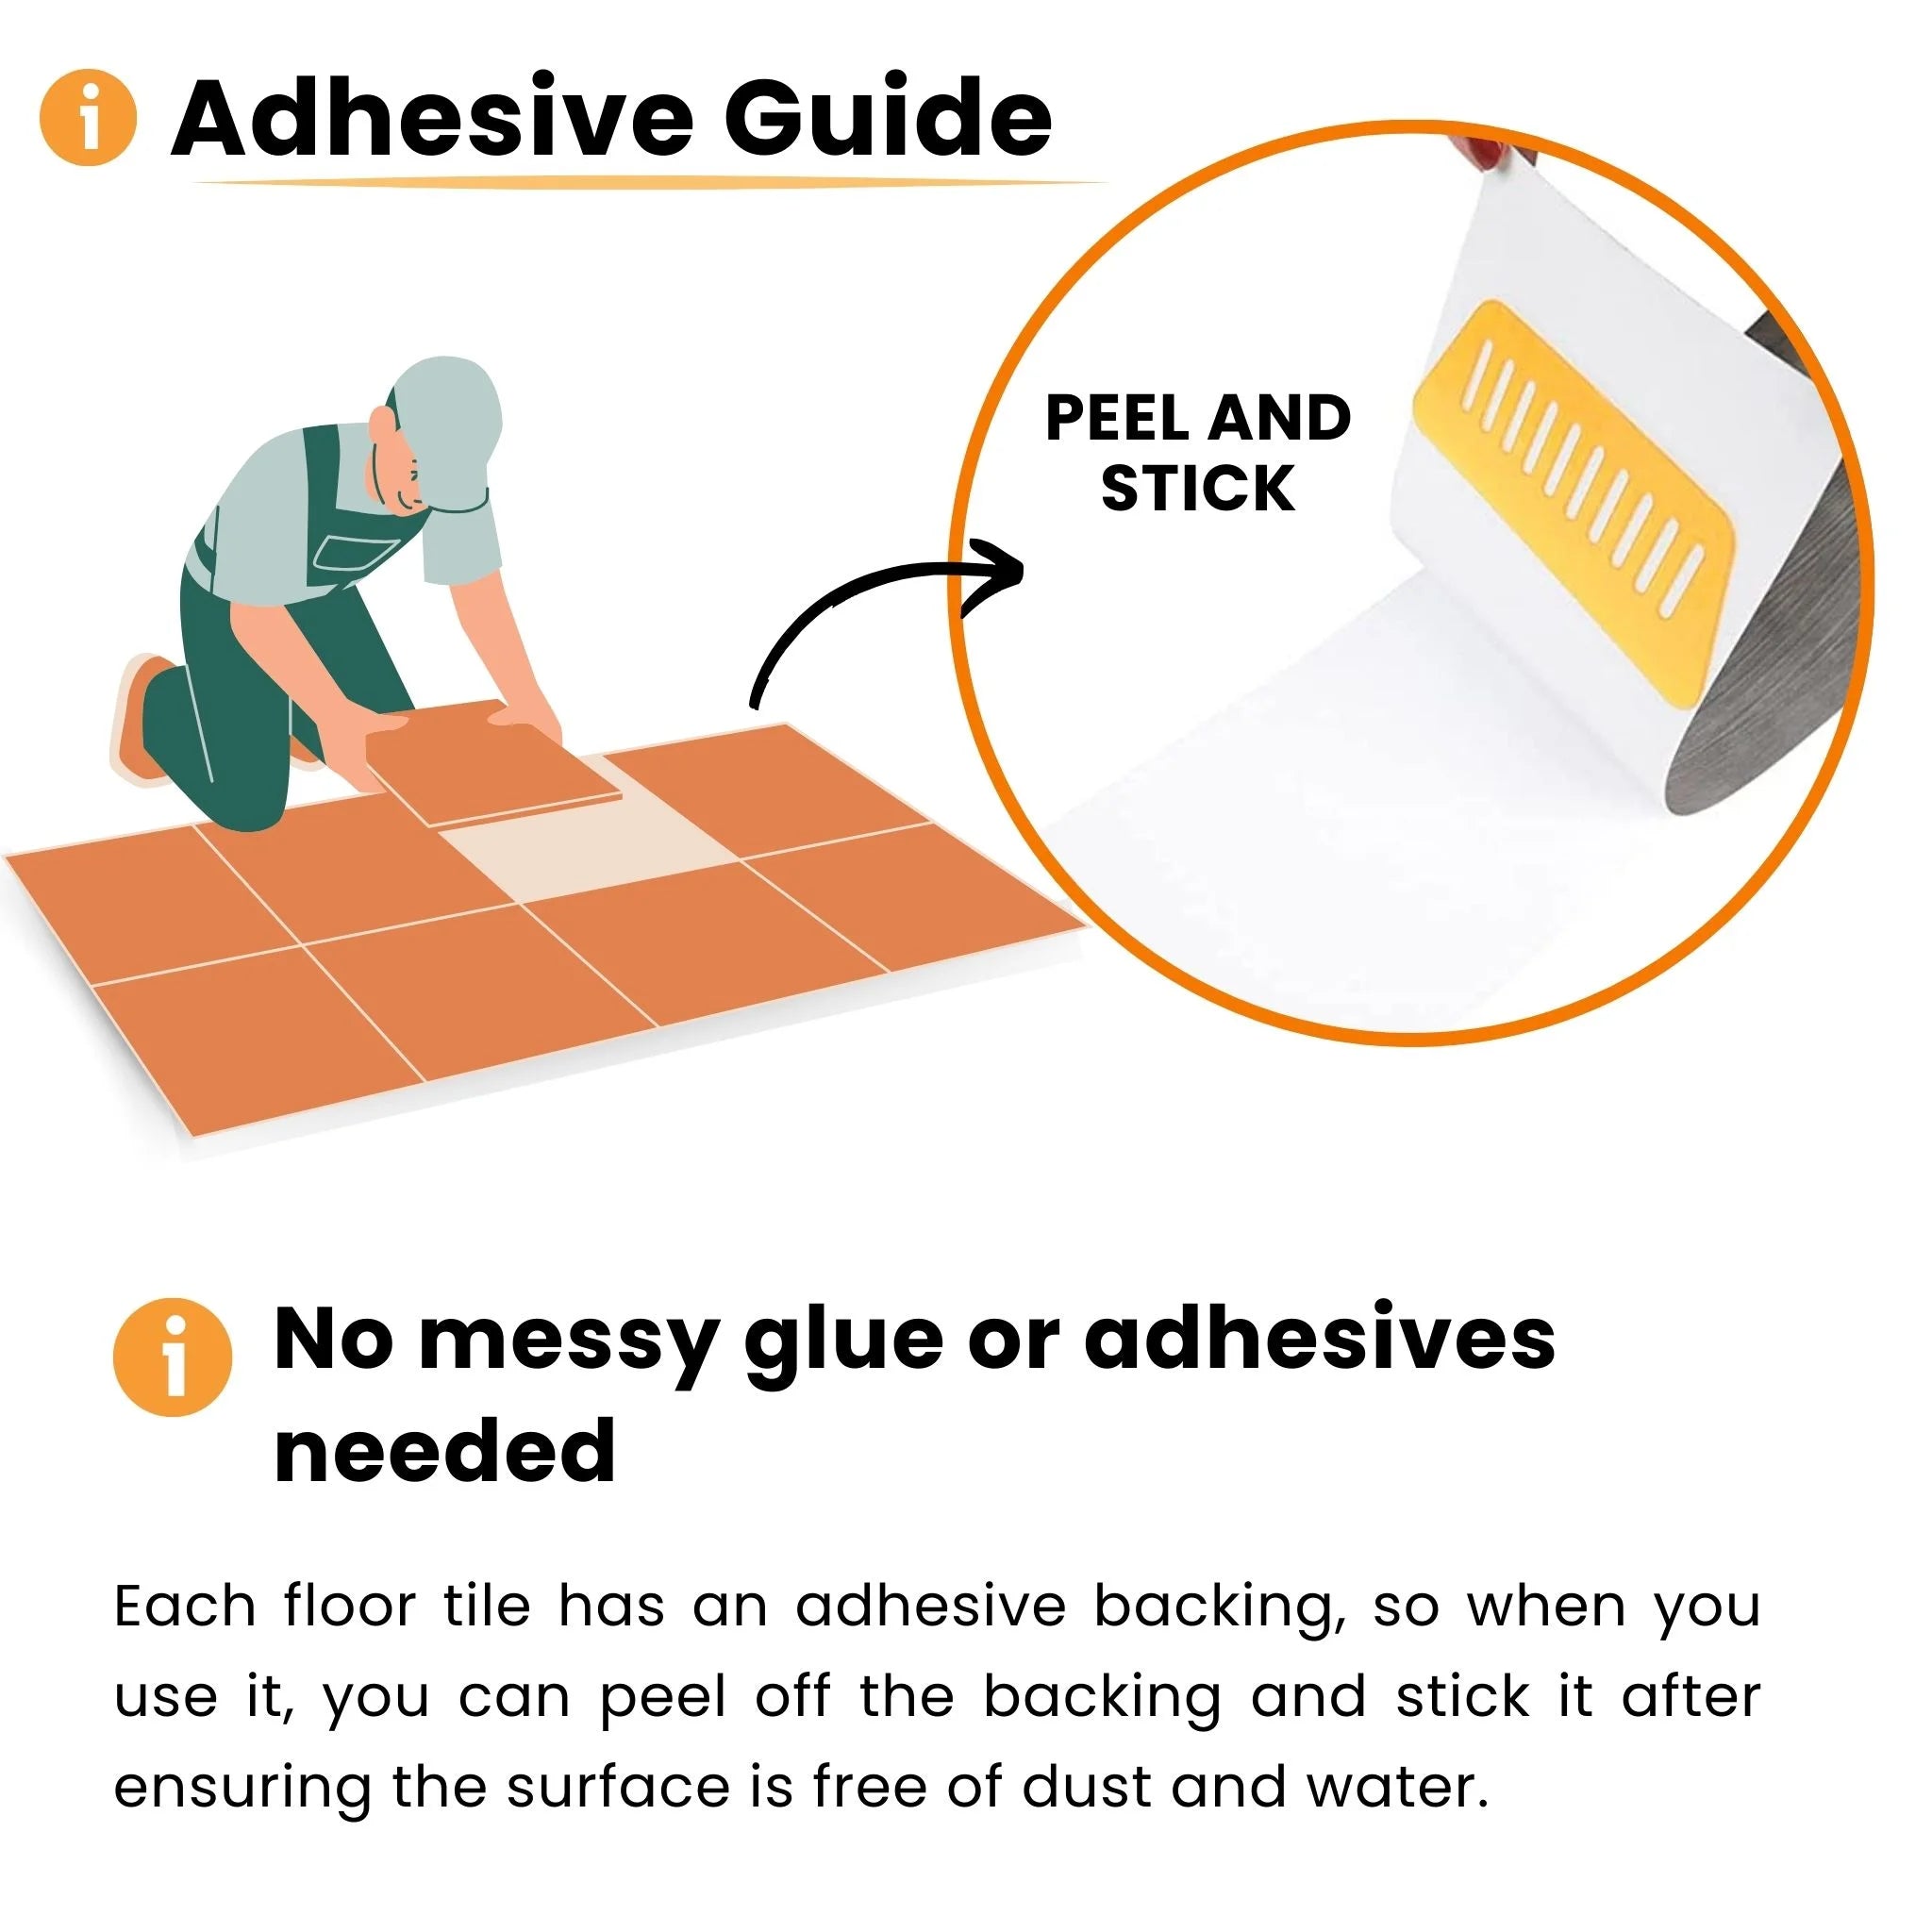 illustration of a person applying self-adhesive tiles using peel and stick method